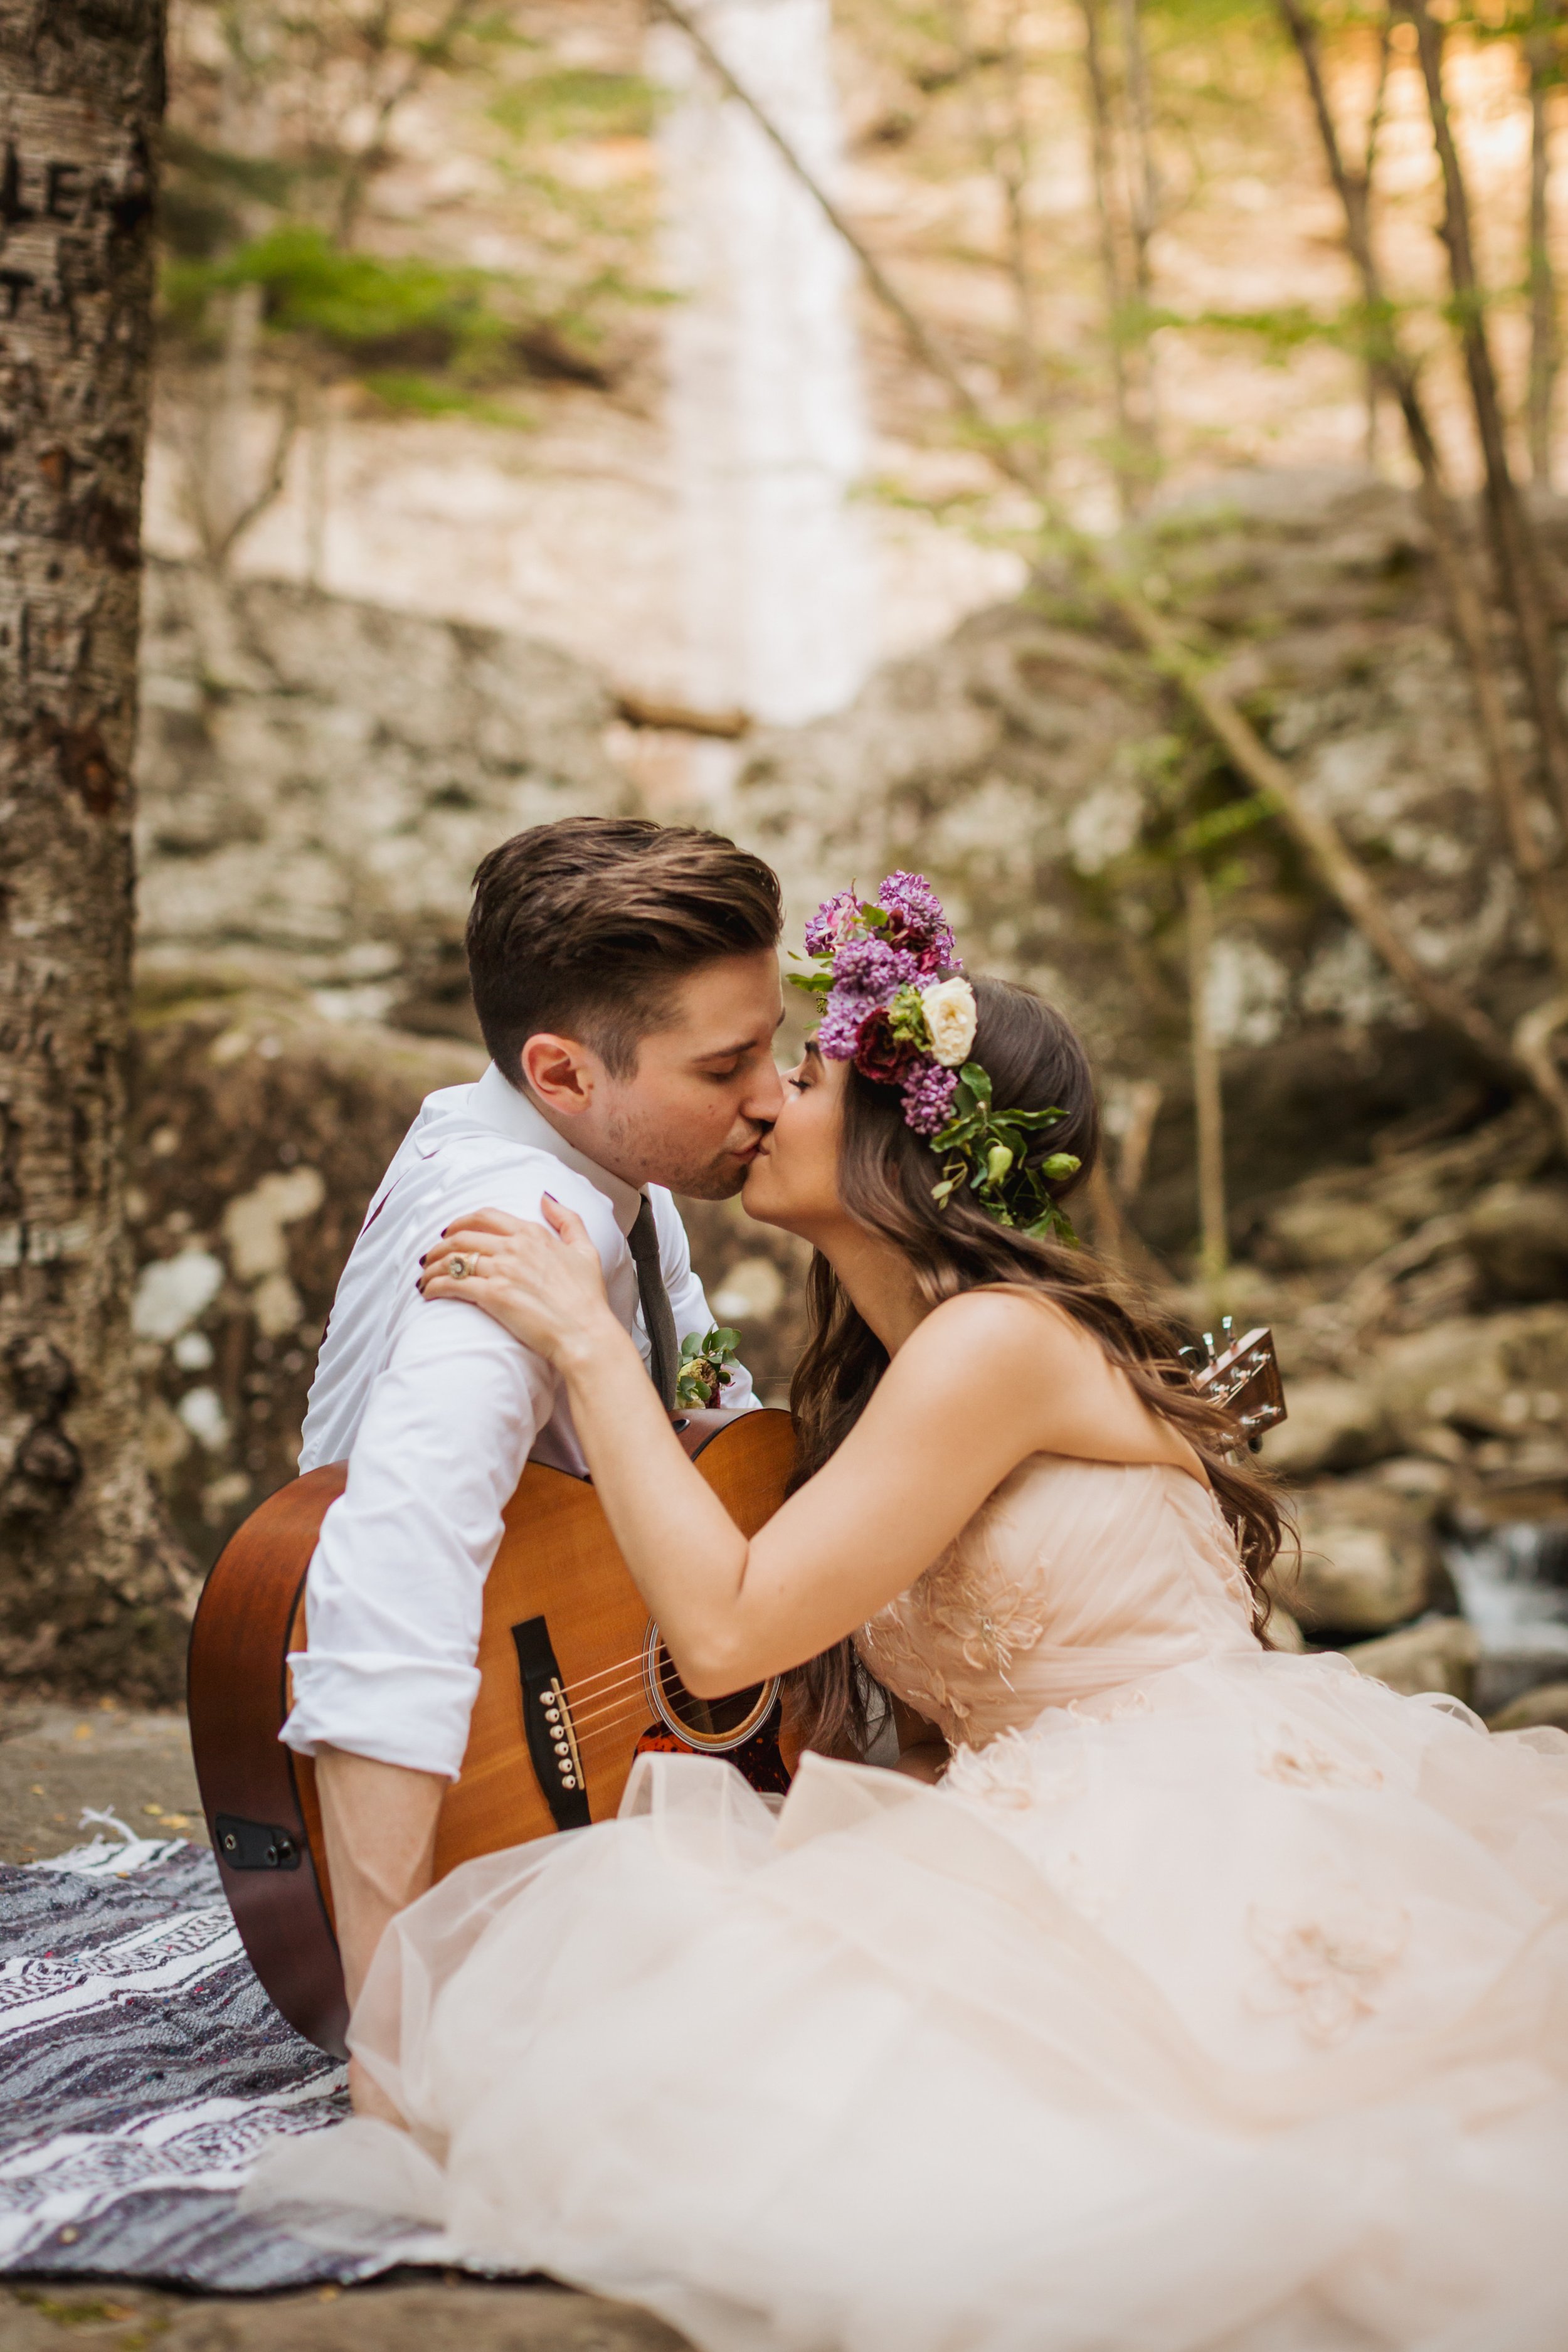 Couple sharing a kiss at their outdoor, nature-inspired elopement shoot with Promise Mountain